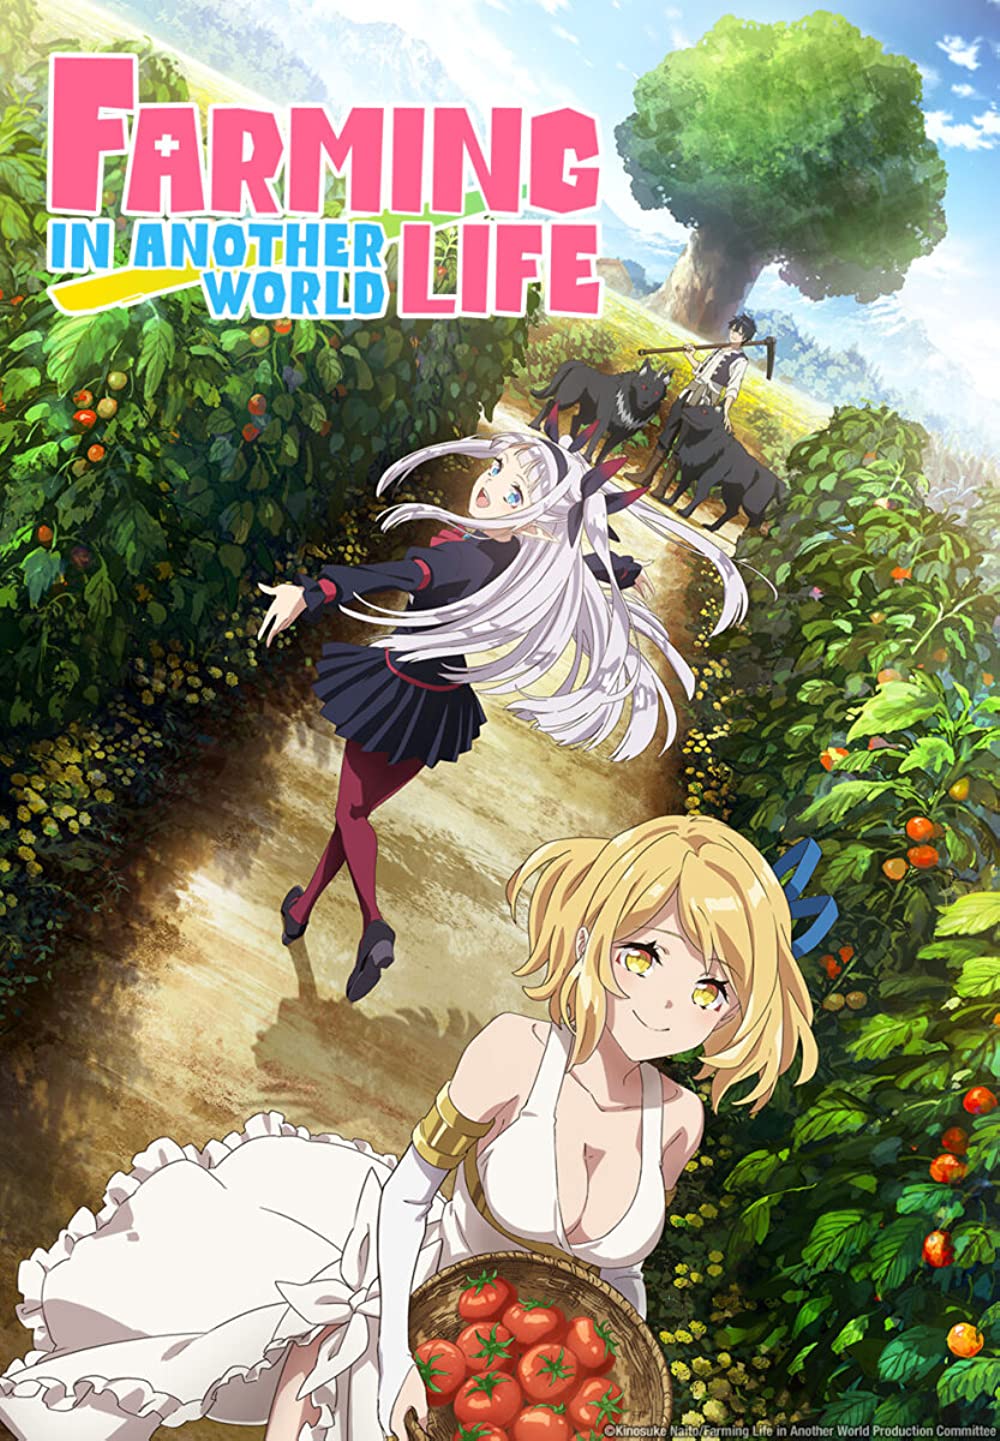 Farming Life in Another World - streaming online